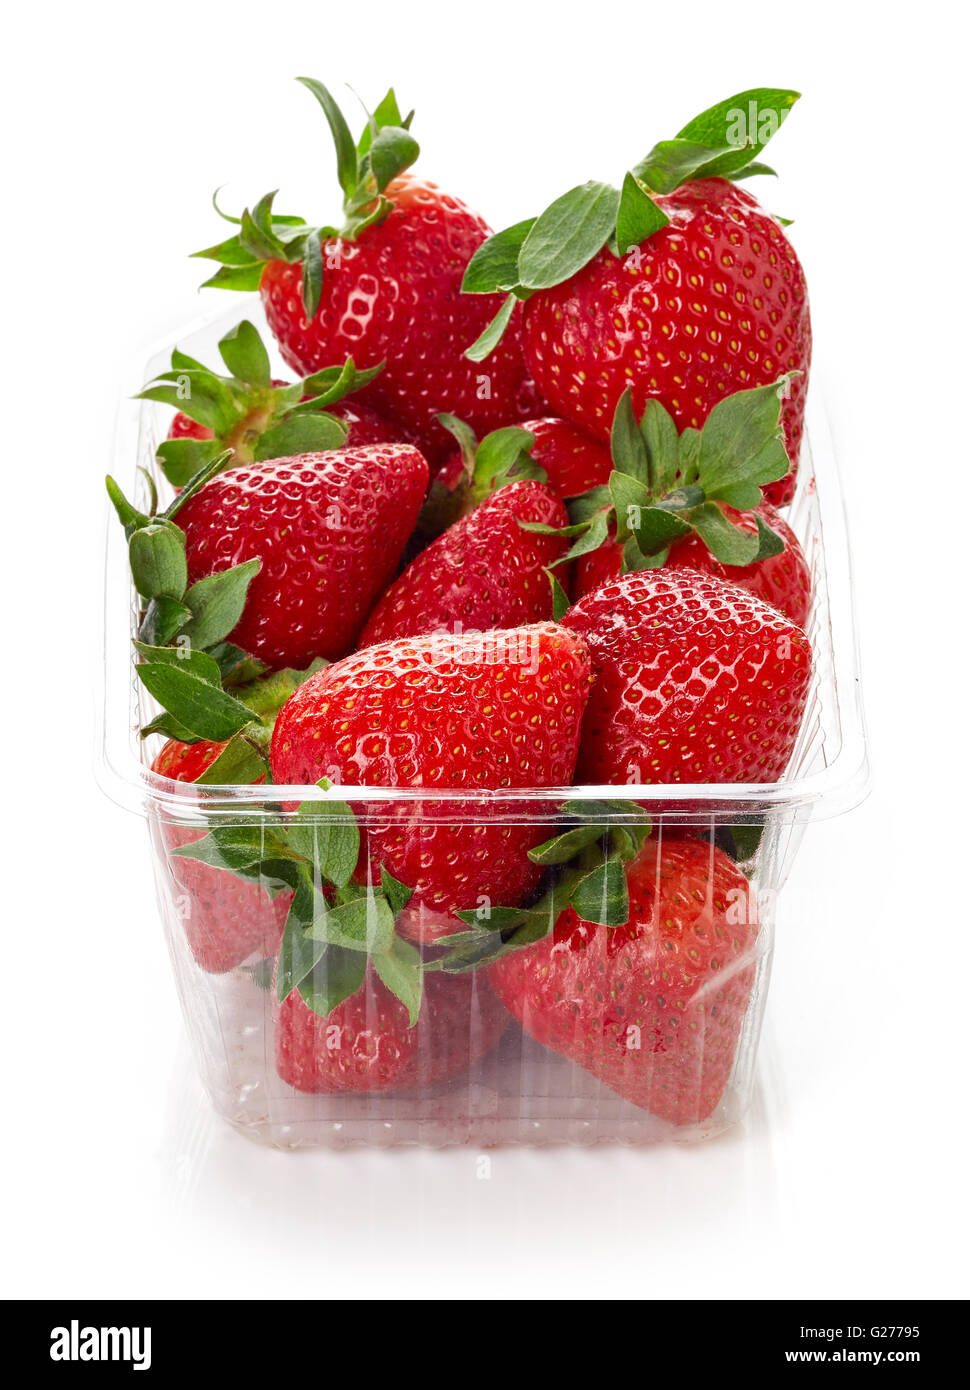 strawberry in plastic transparent container box, isolated on white background Stock Photo